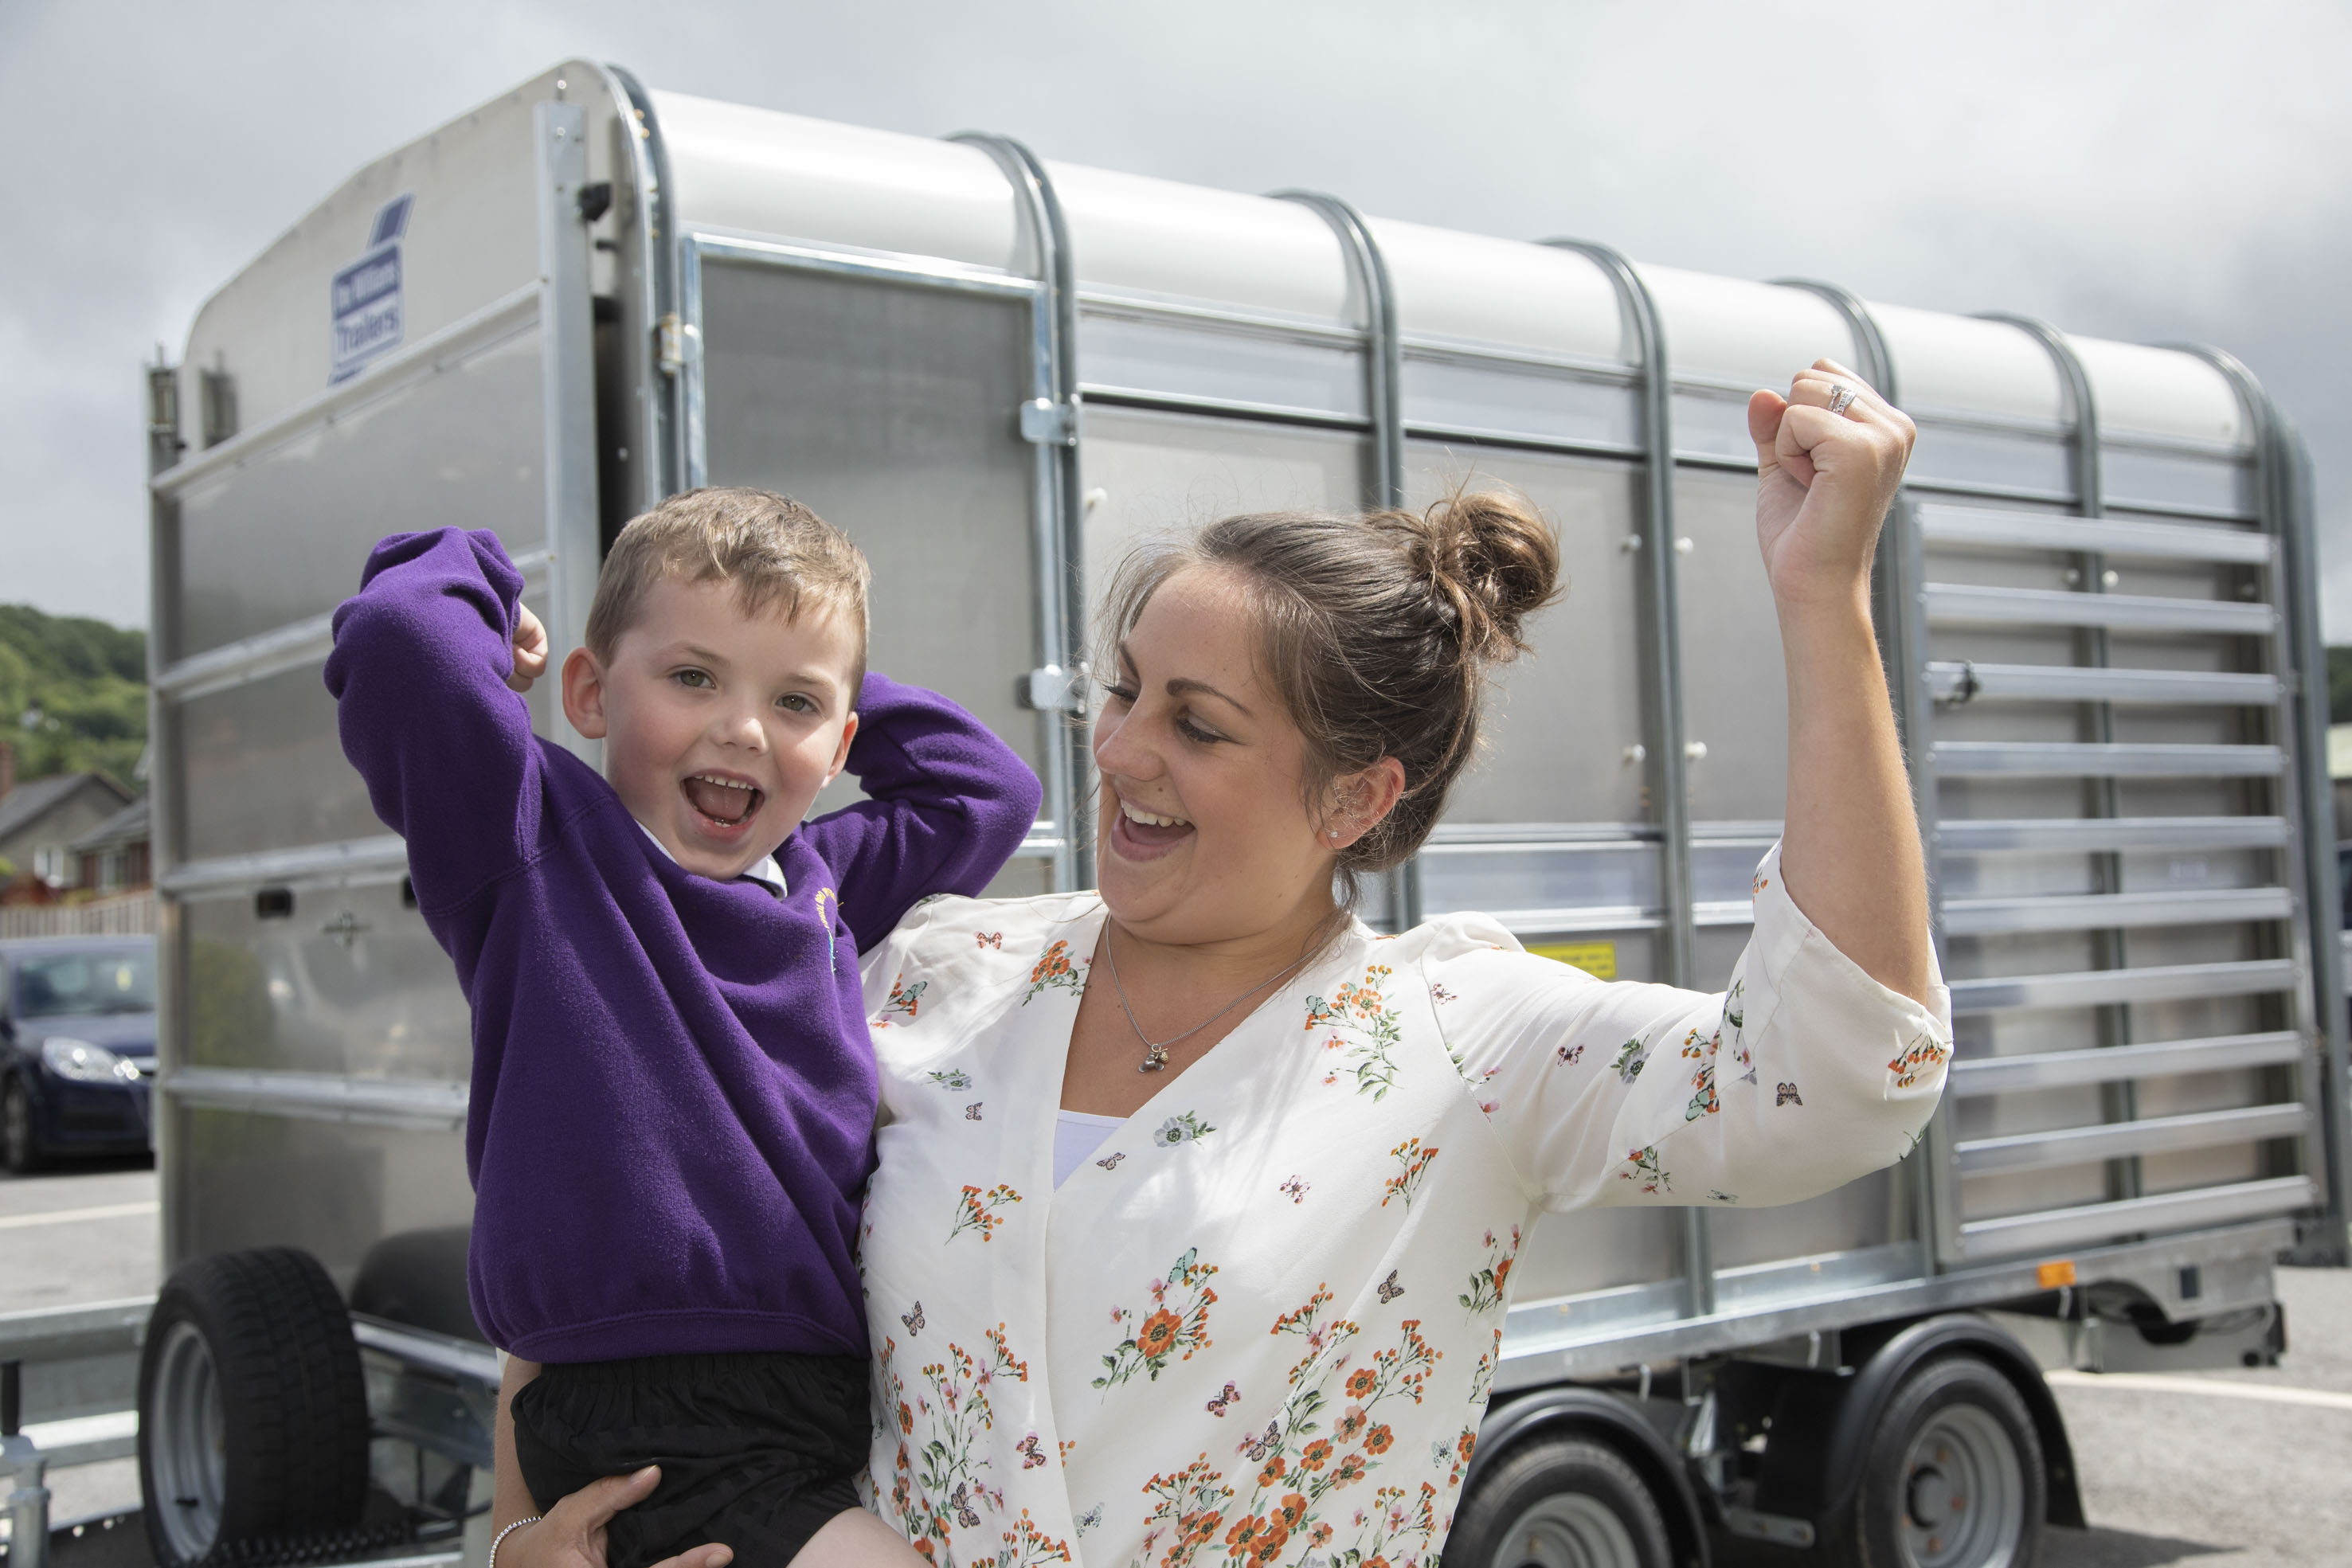 Youngsters pop in to say thanks to trailer firm